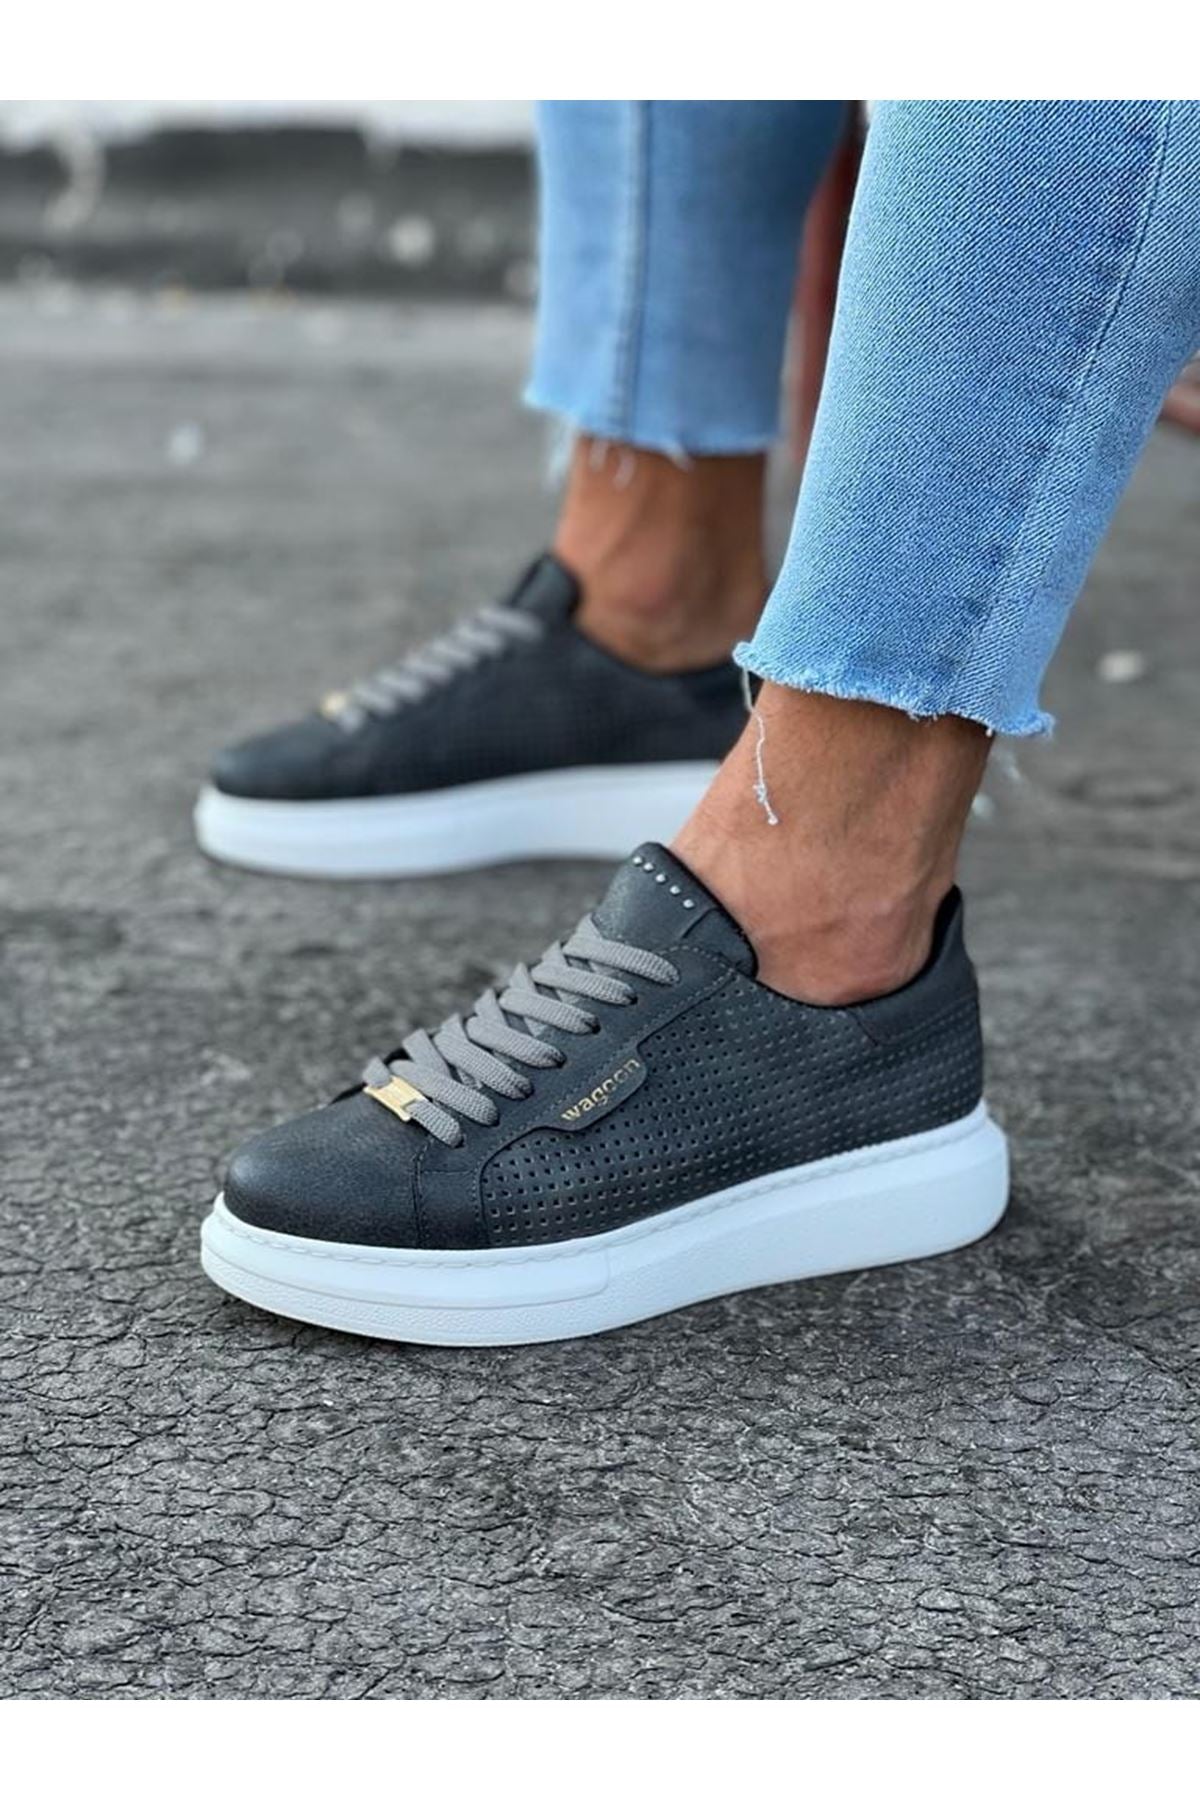 WG01 Gray Perforated Men's High-Sole Shoes sneakers - STREETMODE™